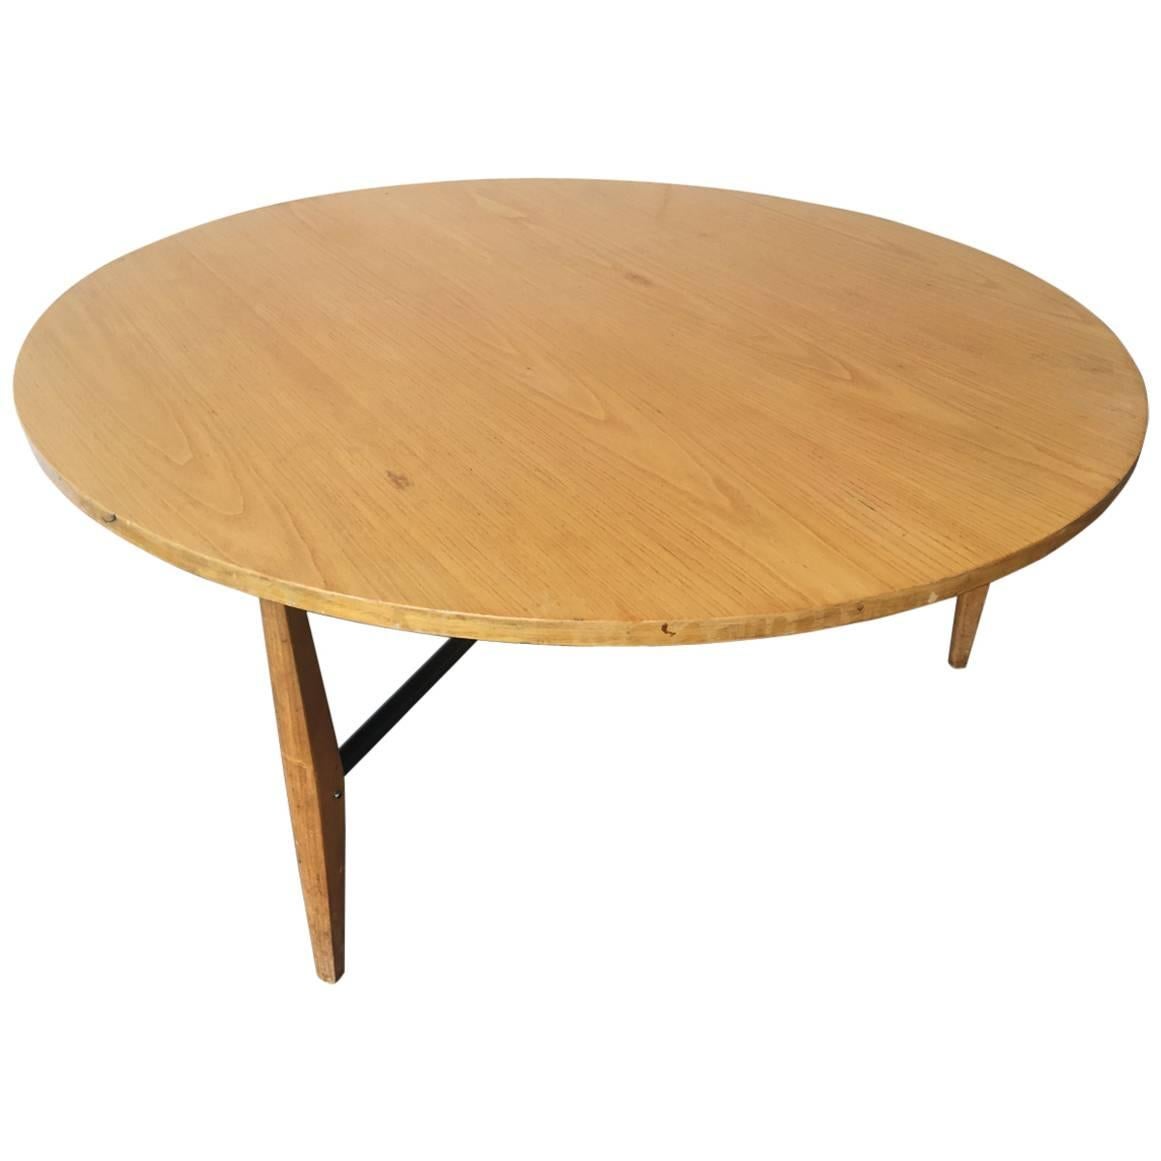 Very Rare No. 401 Coffee Table by Harry Bertoia for Knoll International For Sale